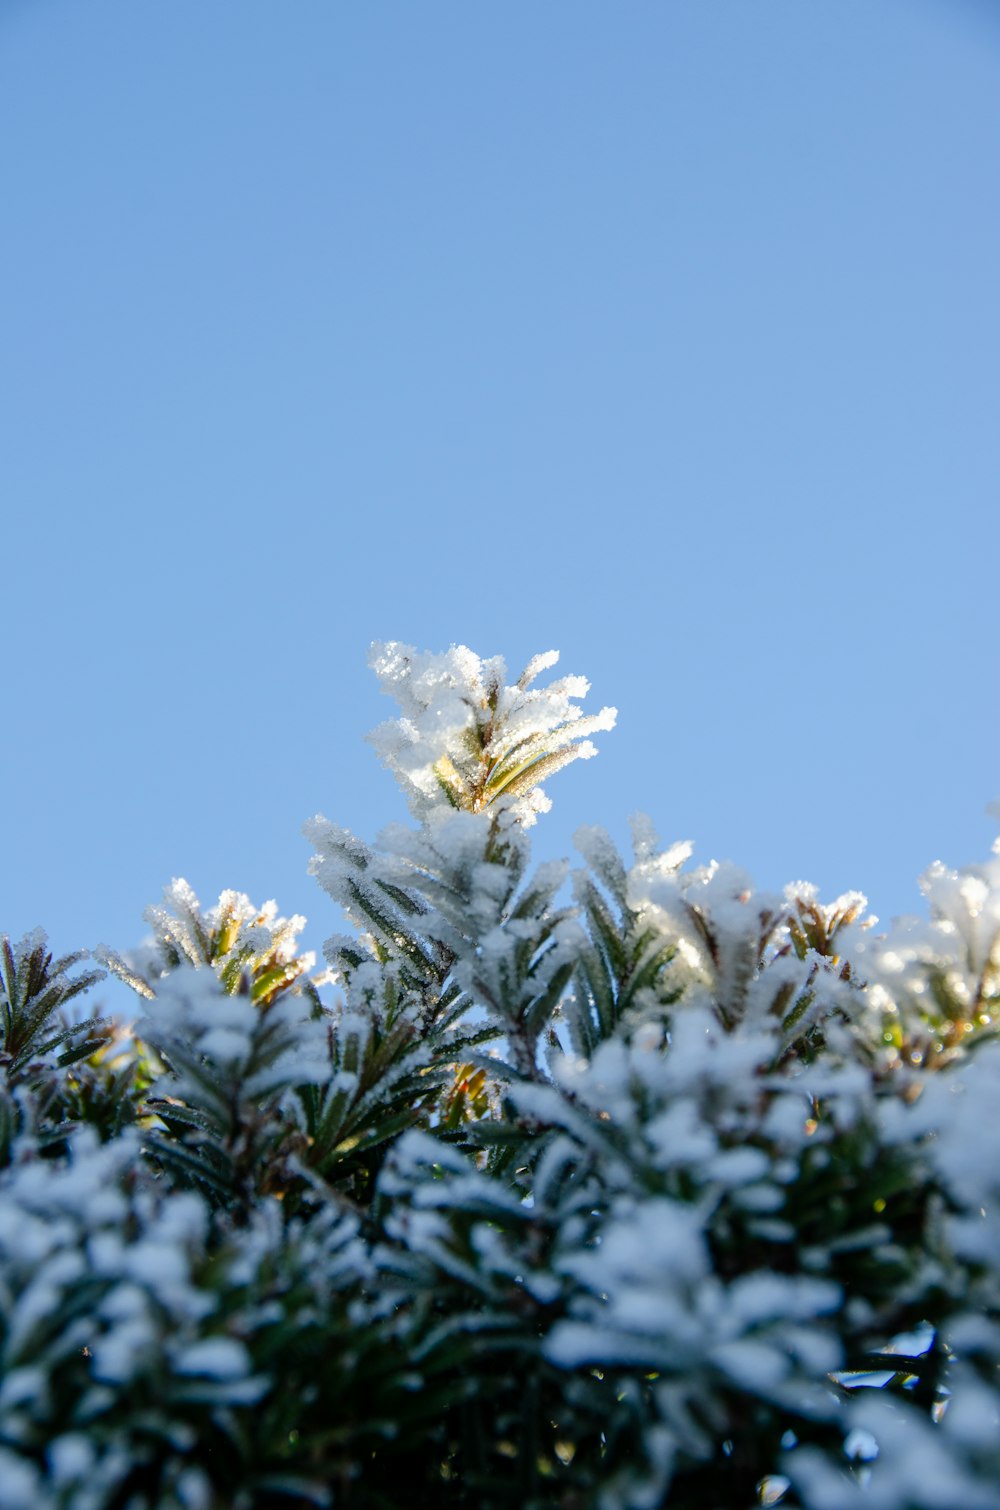 a tree with snow on it and a blue sky in the background